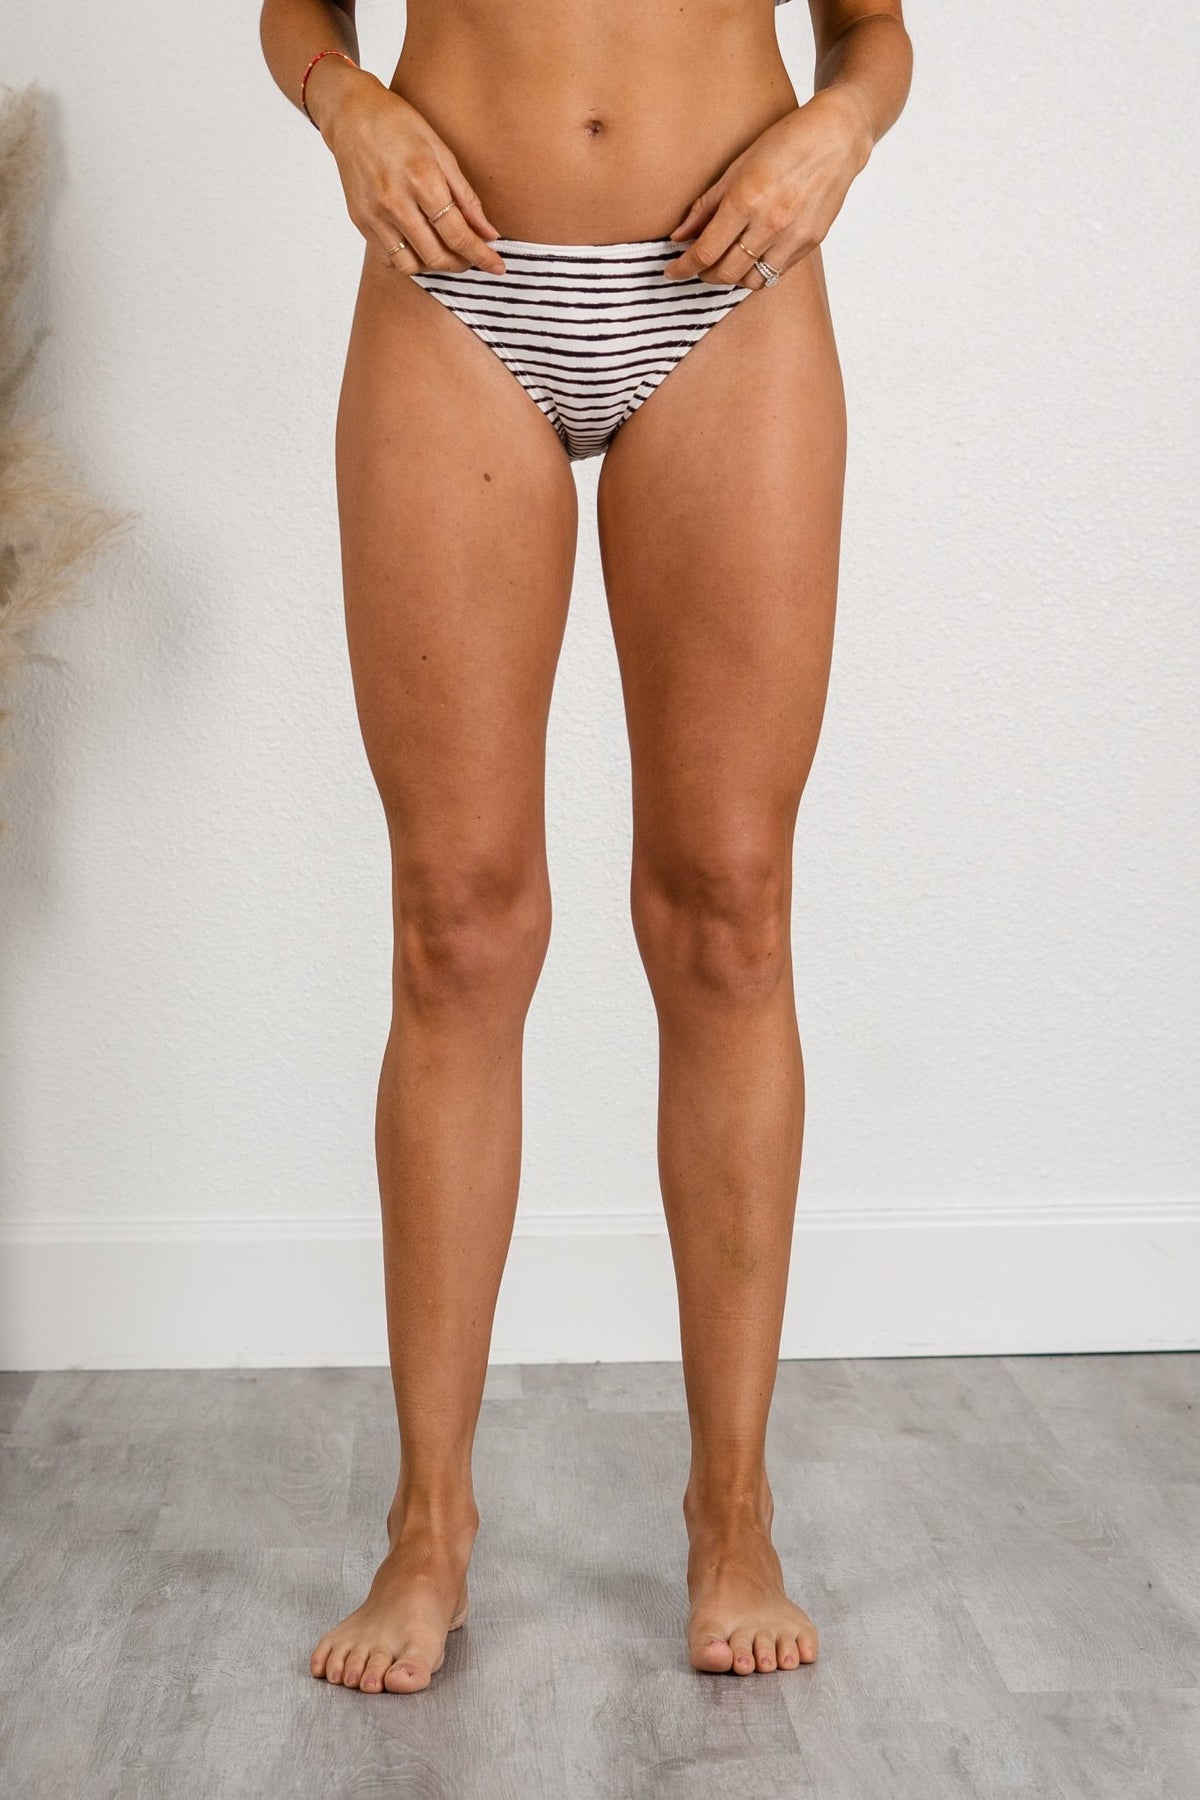 Stripe swim bottoms - Cute swimsuit - Trendy Swimsuits at Lush Fashion Lounge Boutique in Oklahoma City